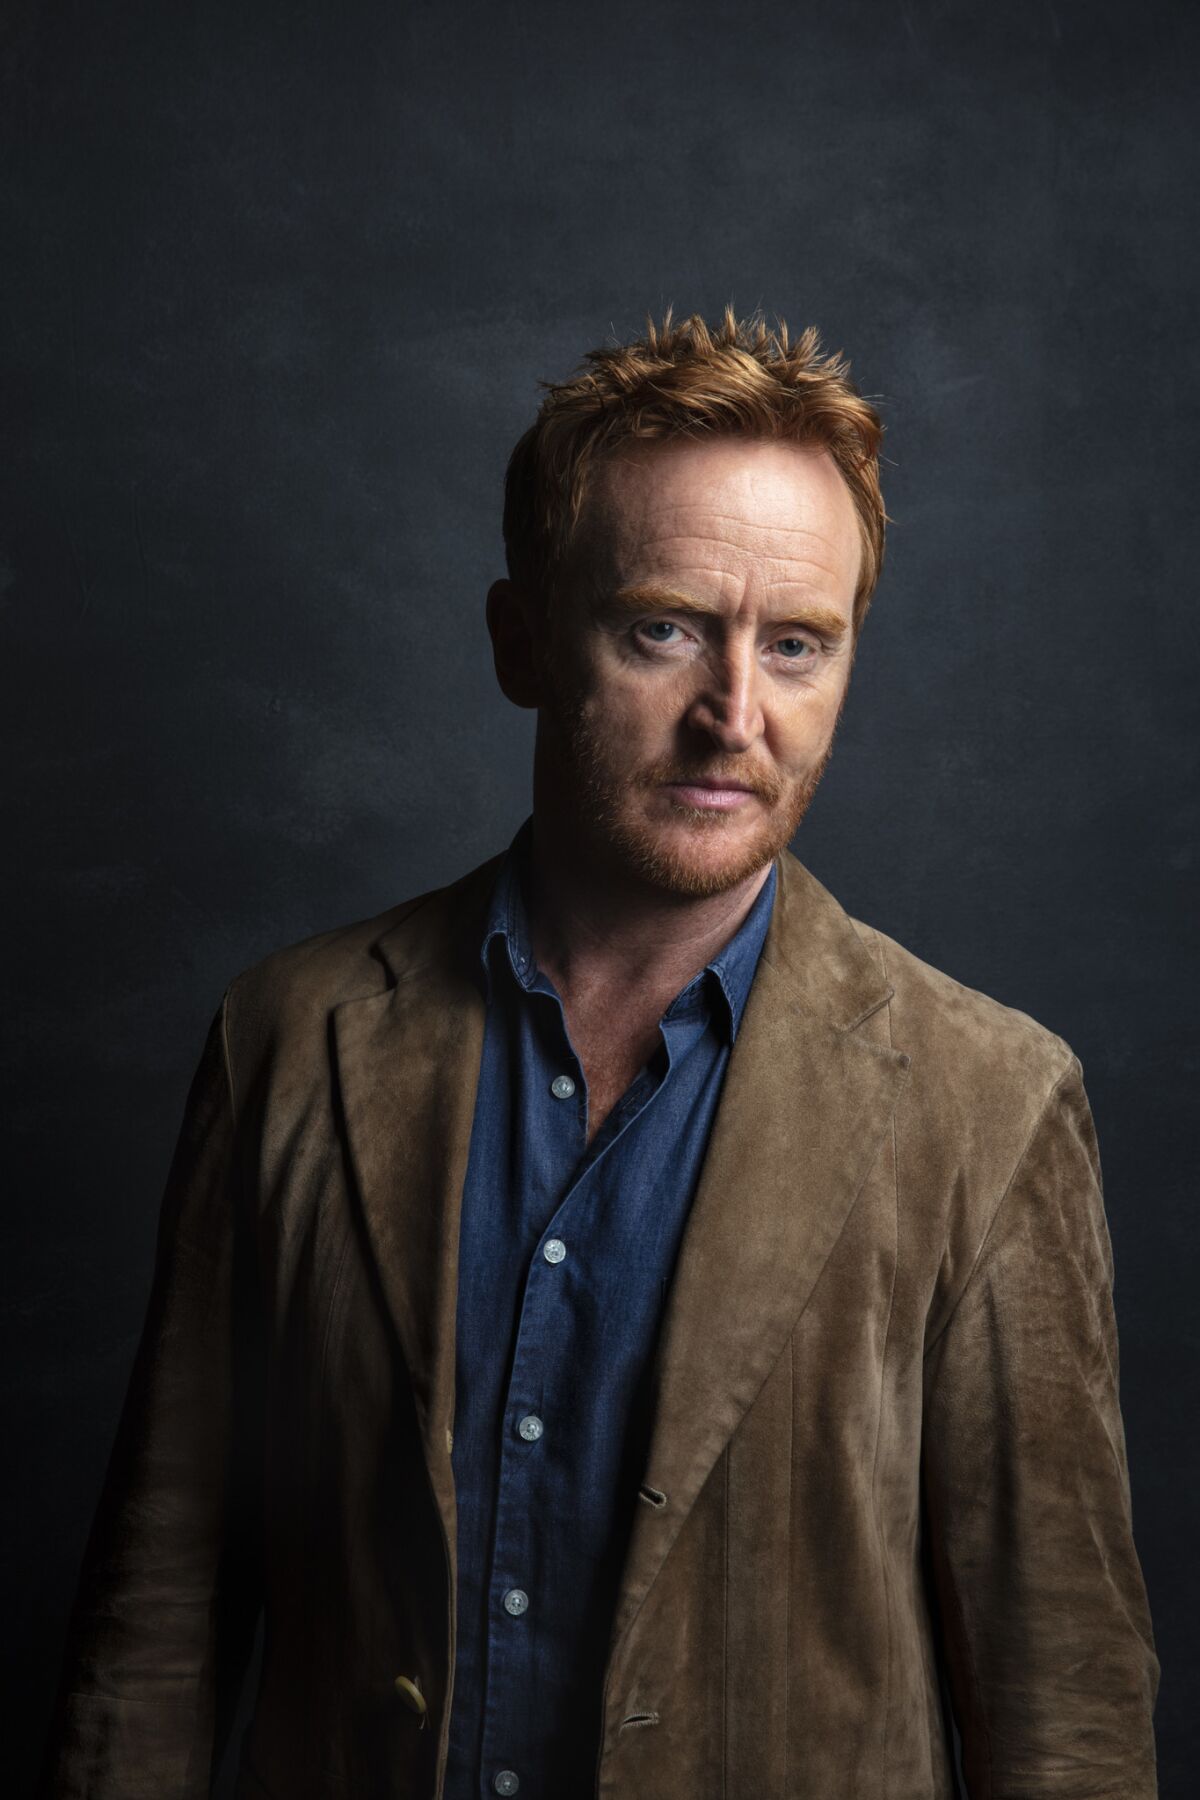 Actor Tony Curran from the film "Outlaw King."